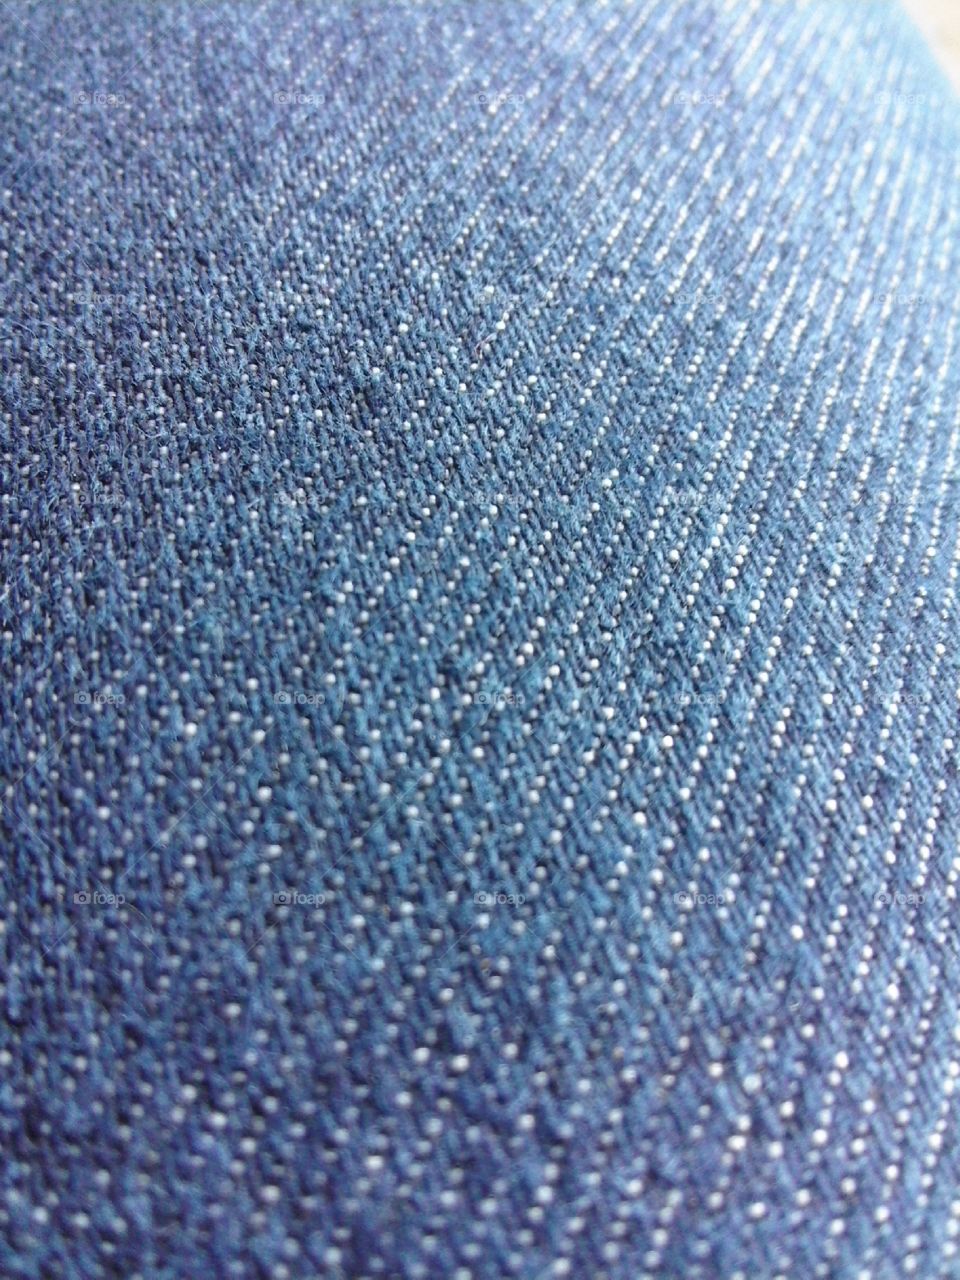 Texture Of Jeans